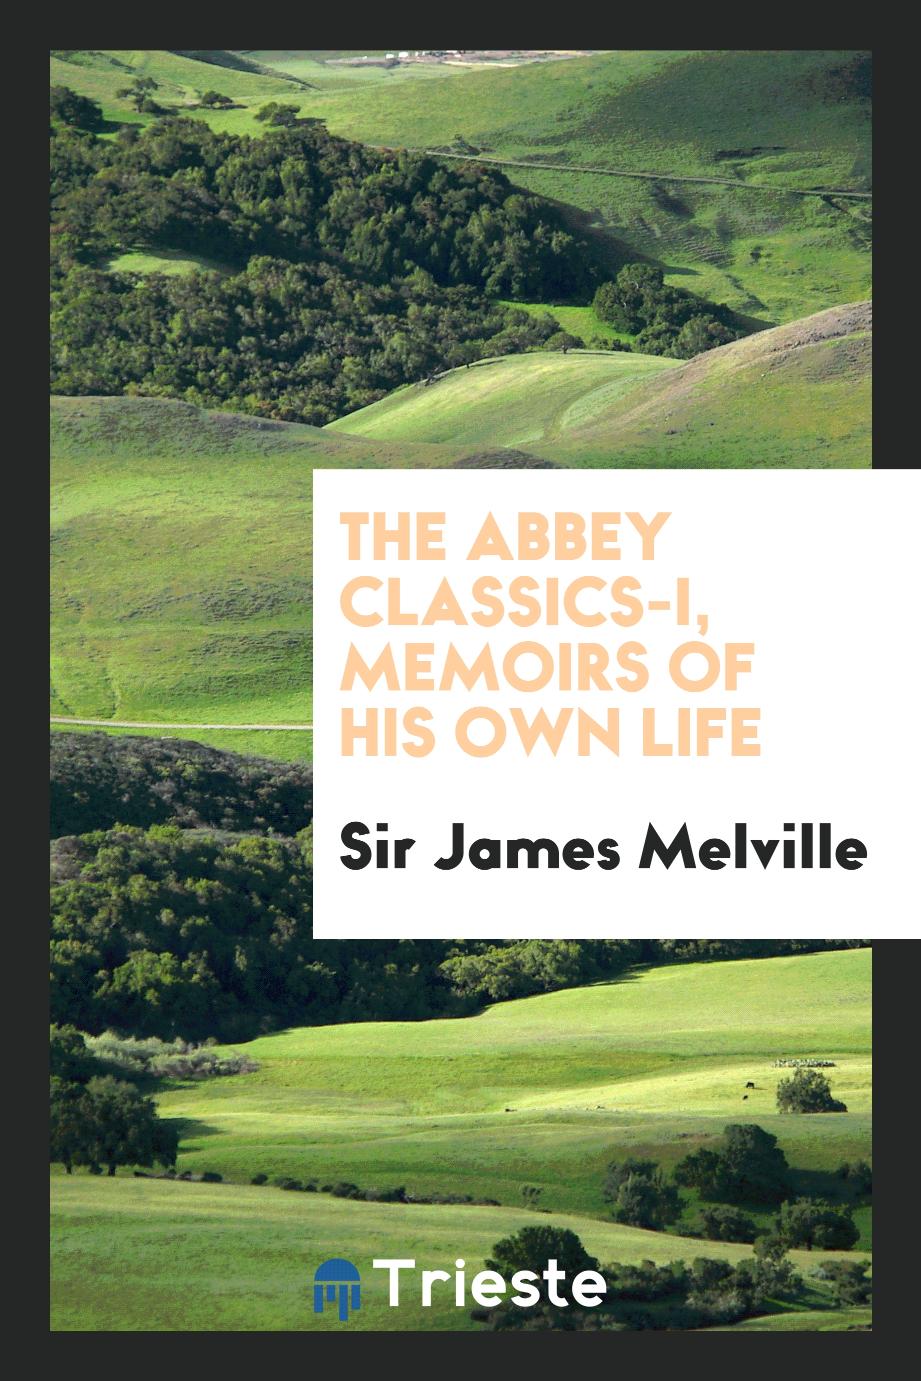 Sir James Melville - The Abbey Classics-I, Memoirs of his own life